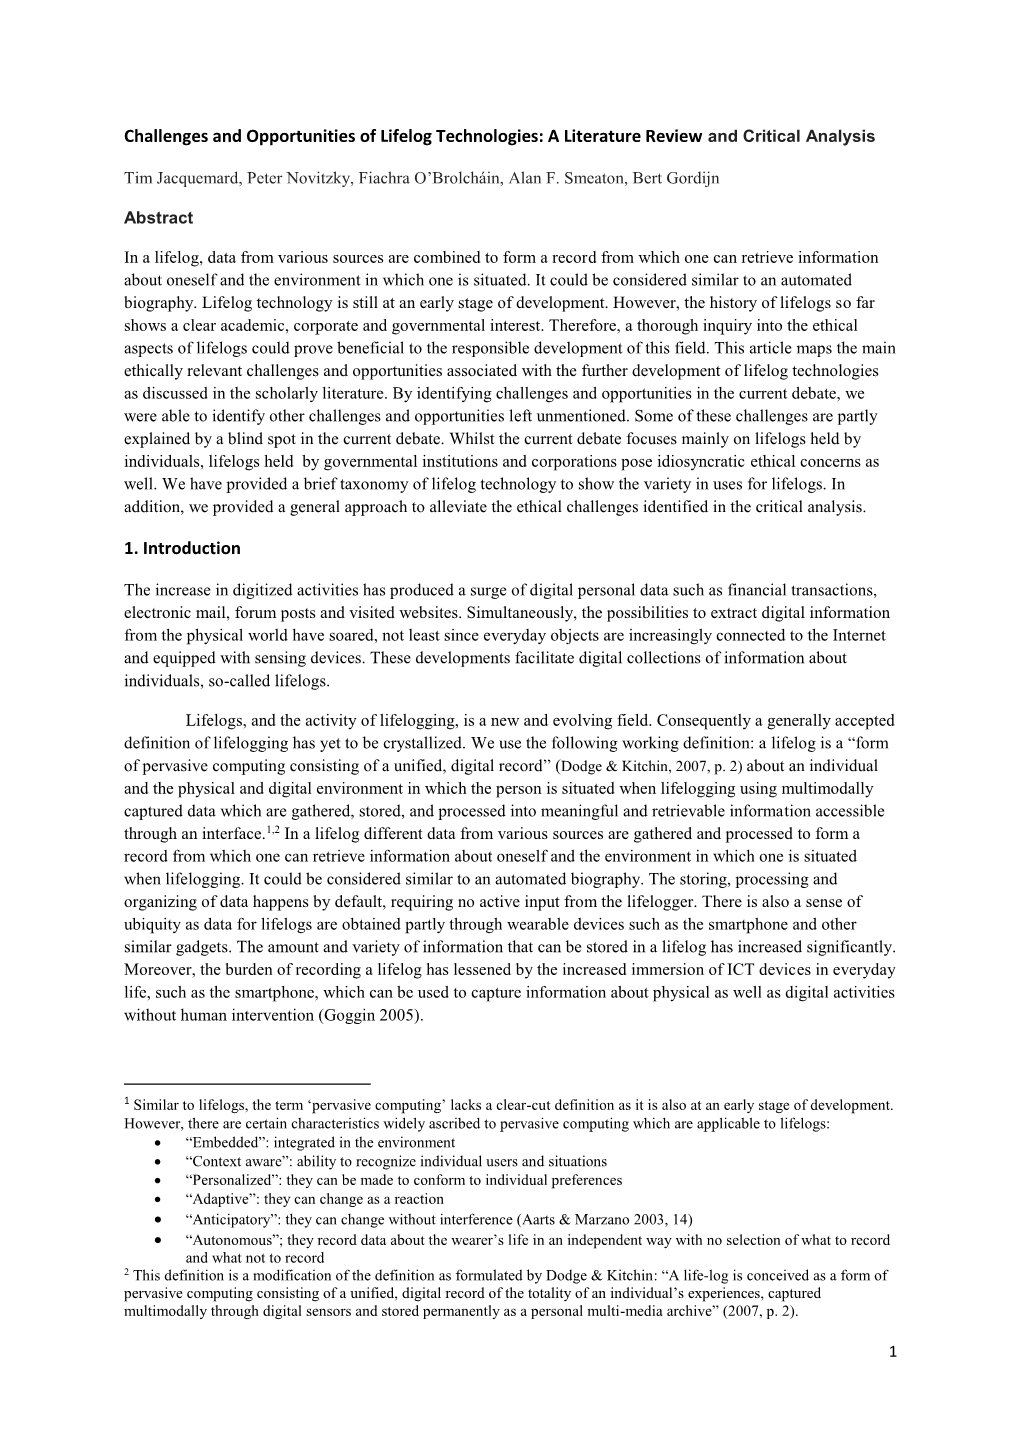 Challenges and Opportunities of Lifelog Technologies: a Literature Review and Critical Analysis